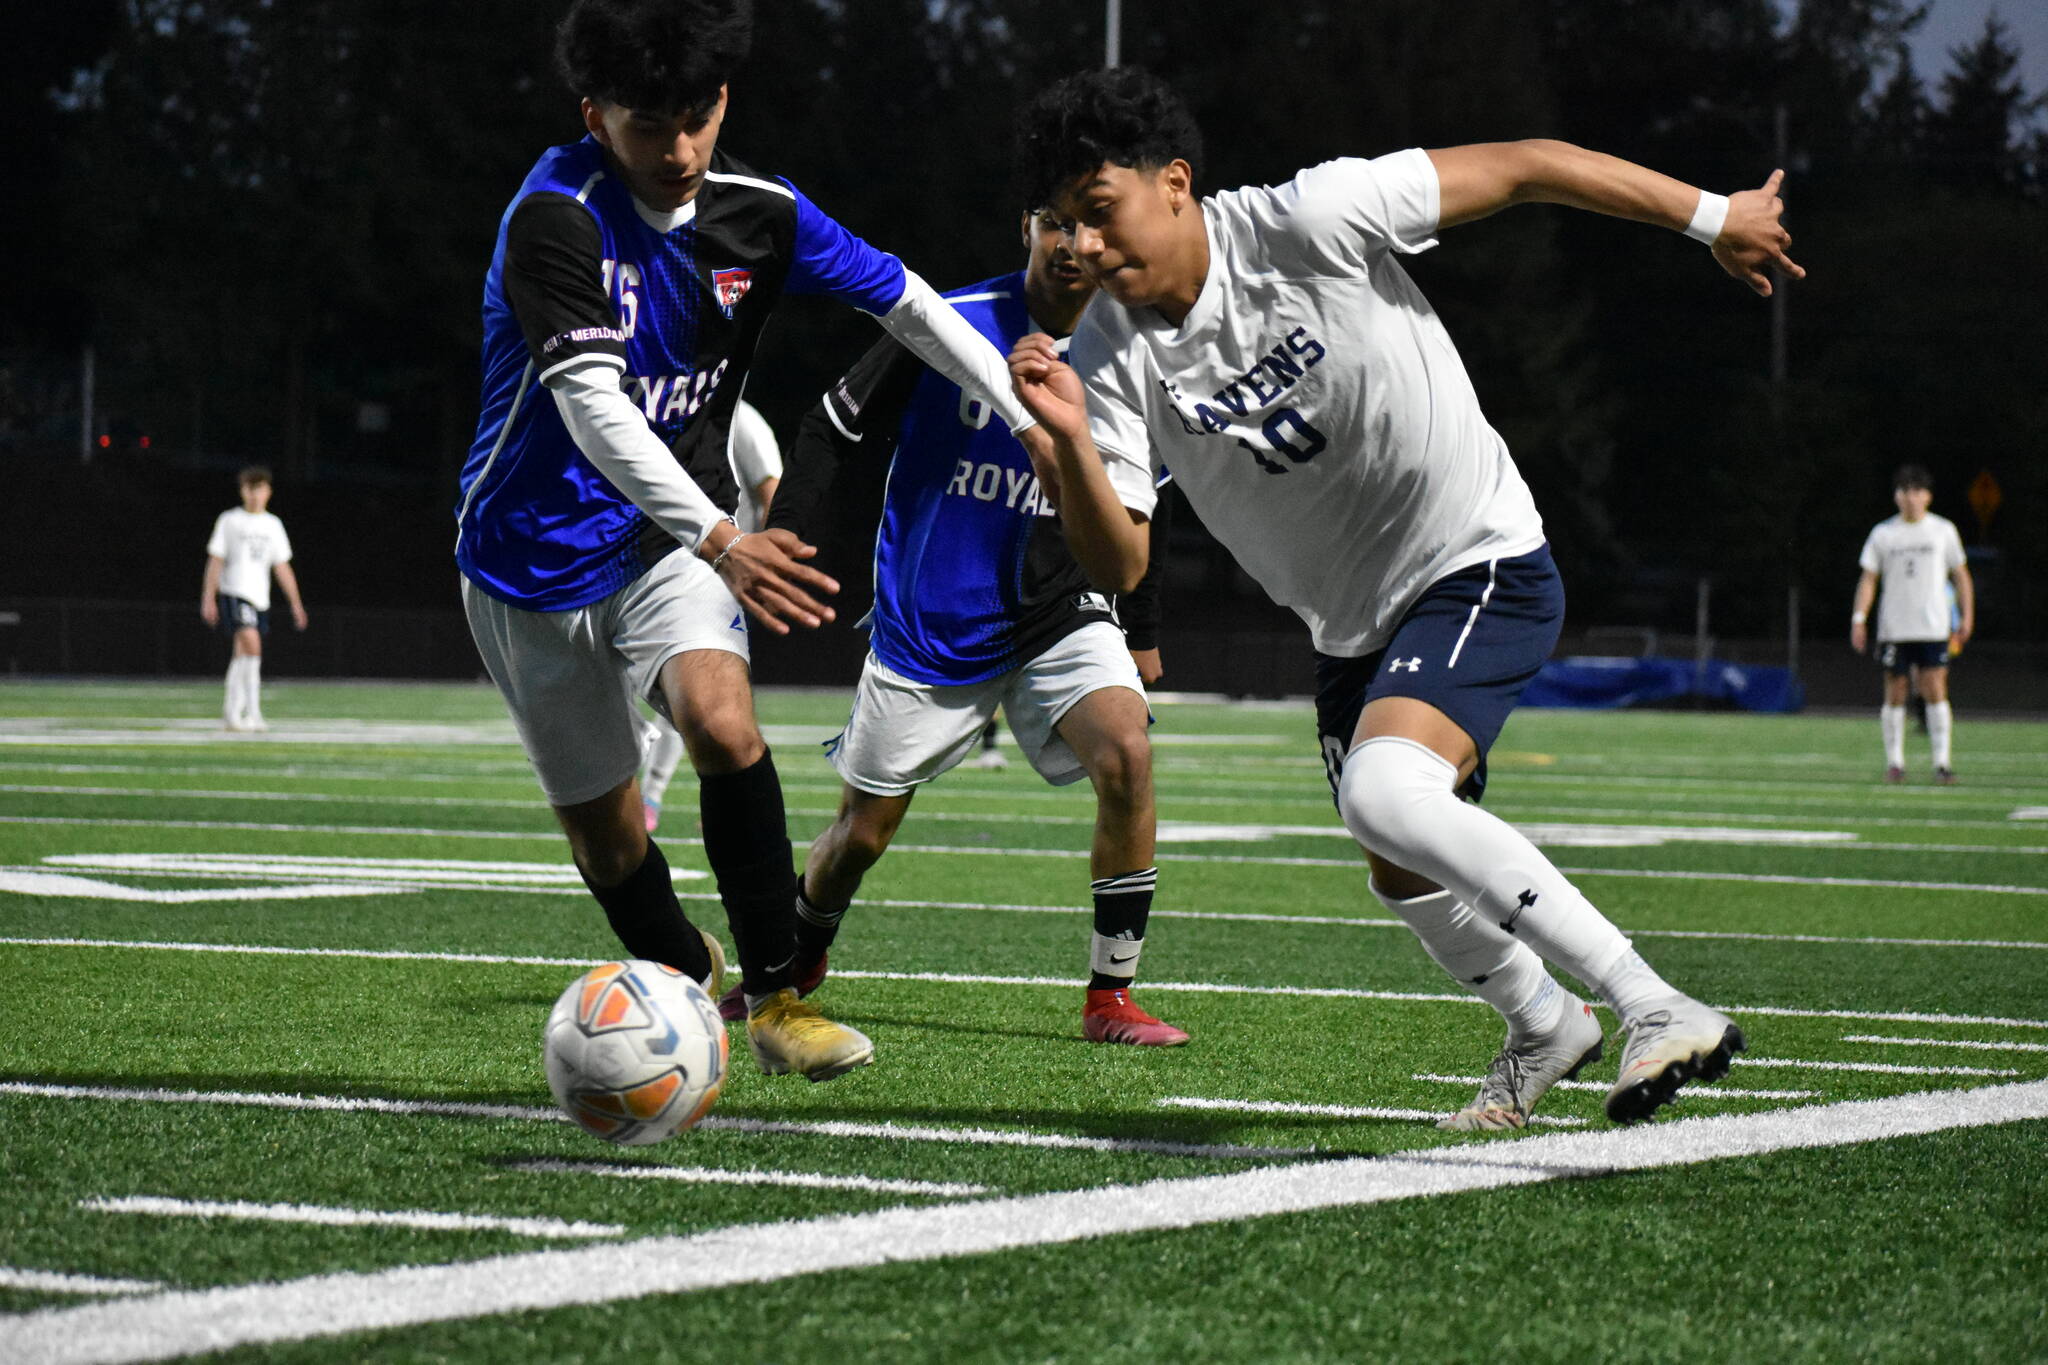 Riverside’s Daniel Hernandez (10) fights for possession and momentum. Ben Ray / The Reporter